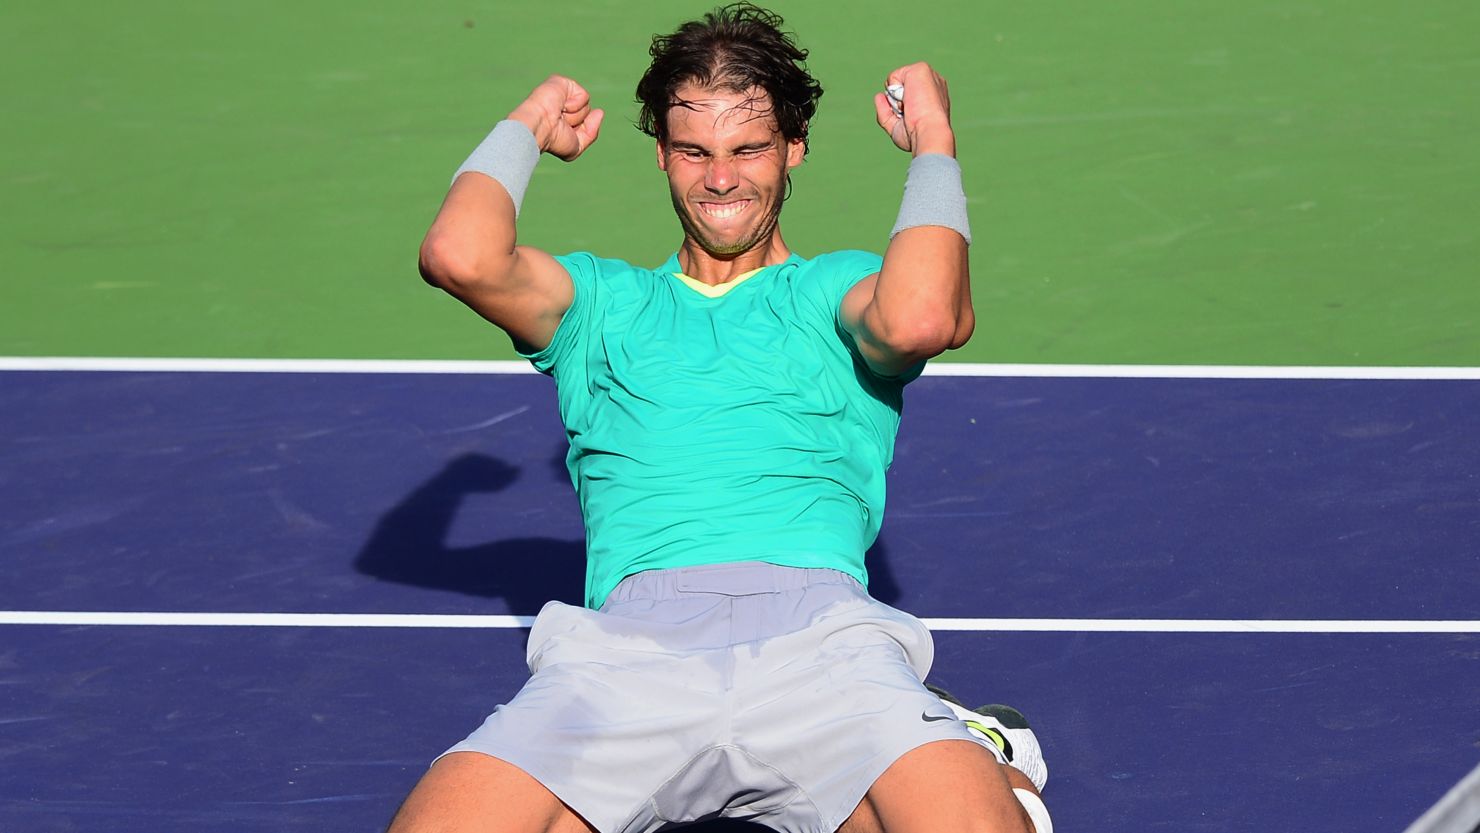 Former world No. 1 Rafael Nadal won the Indian Wells Masters for the third time.